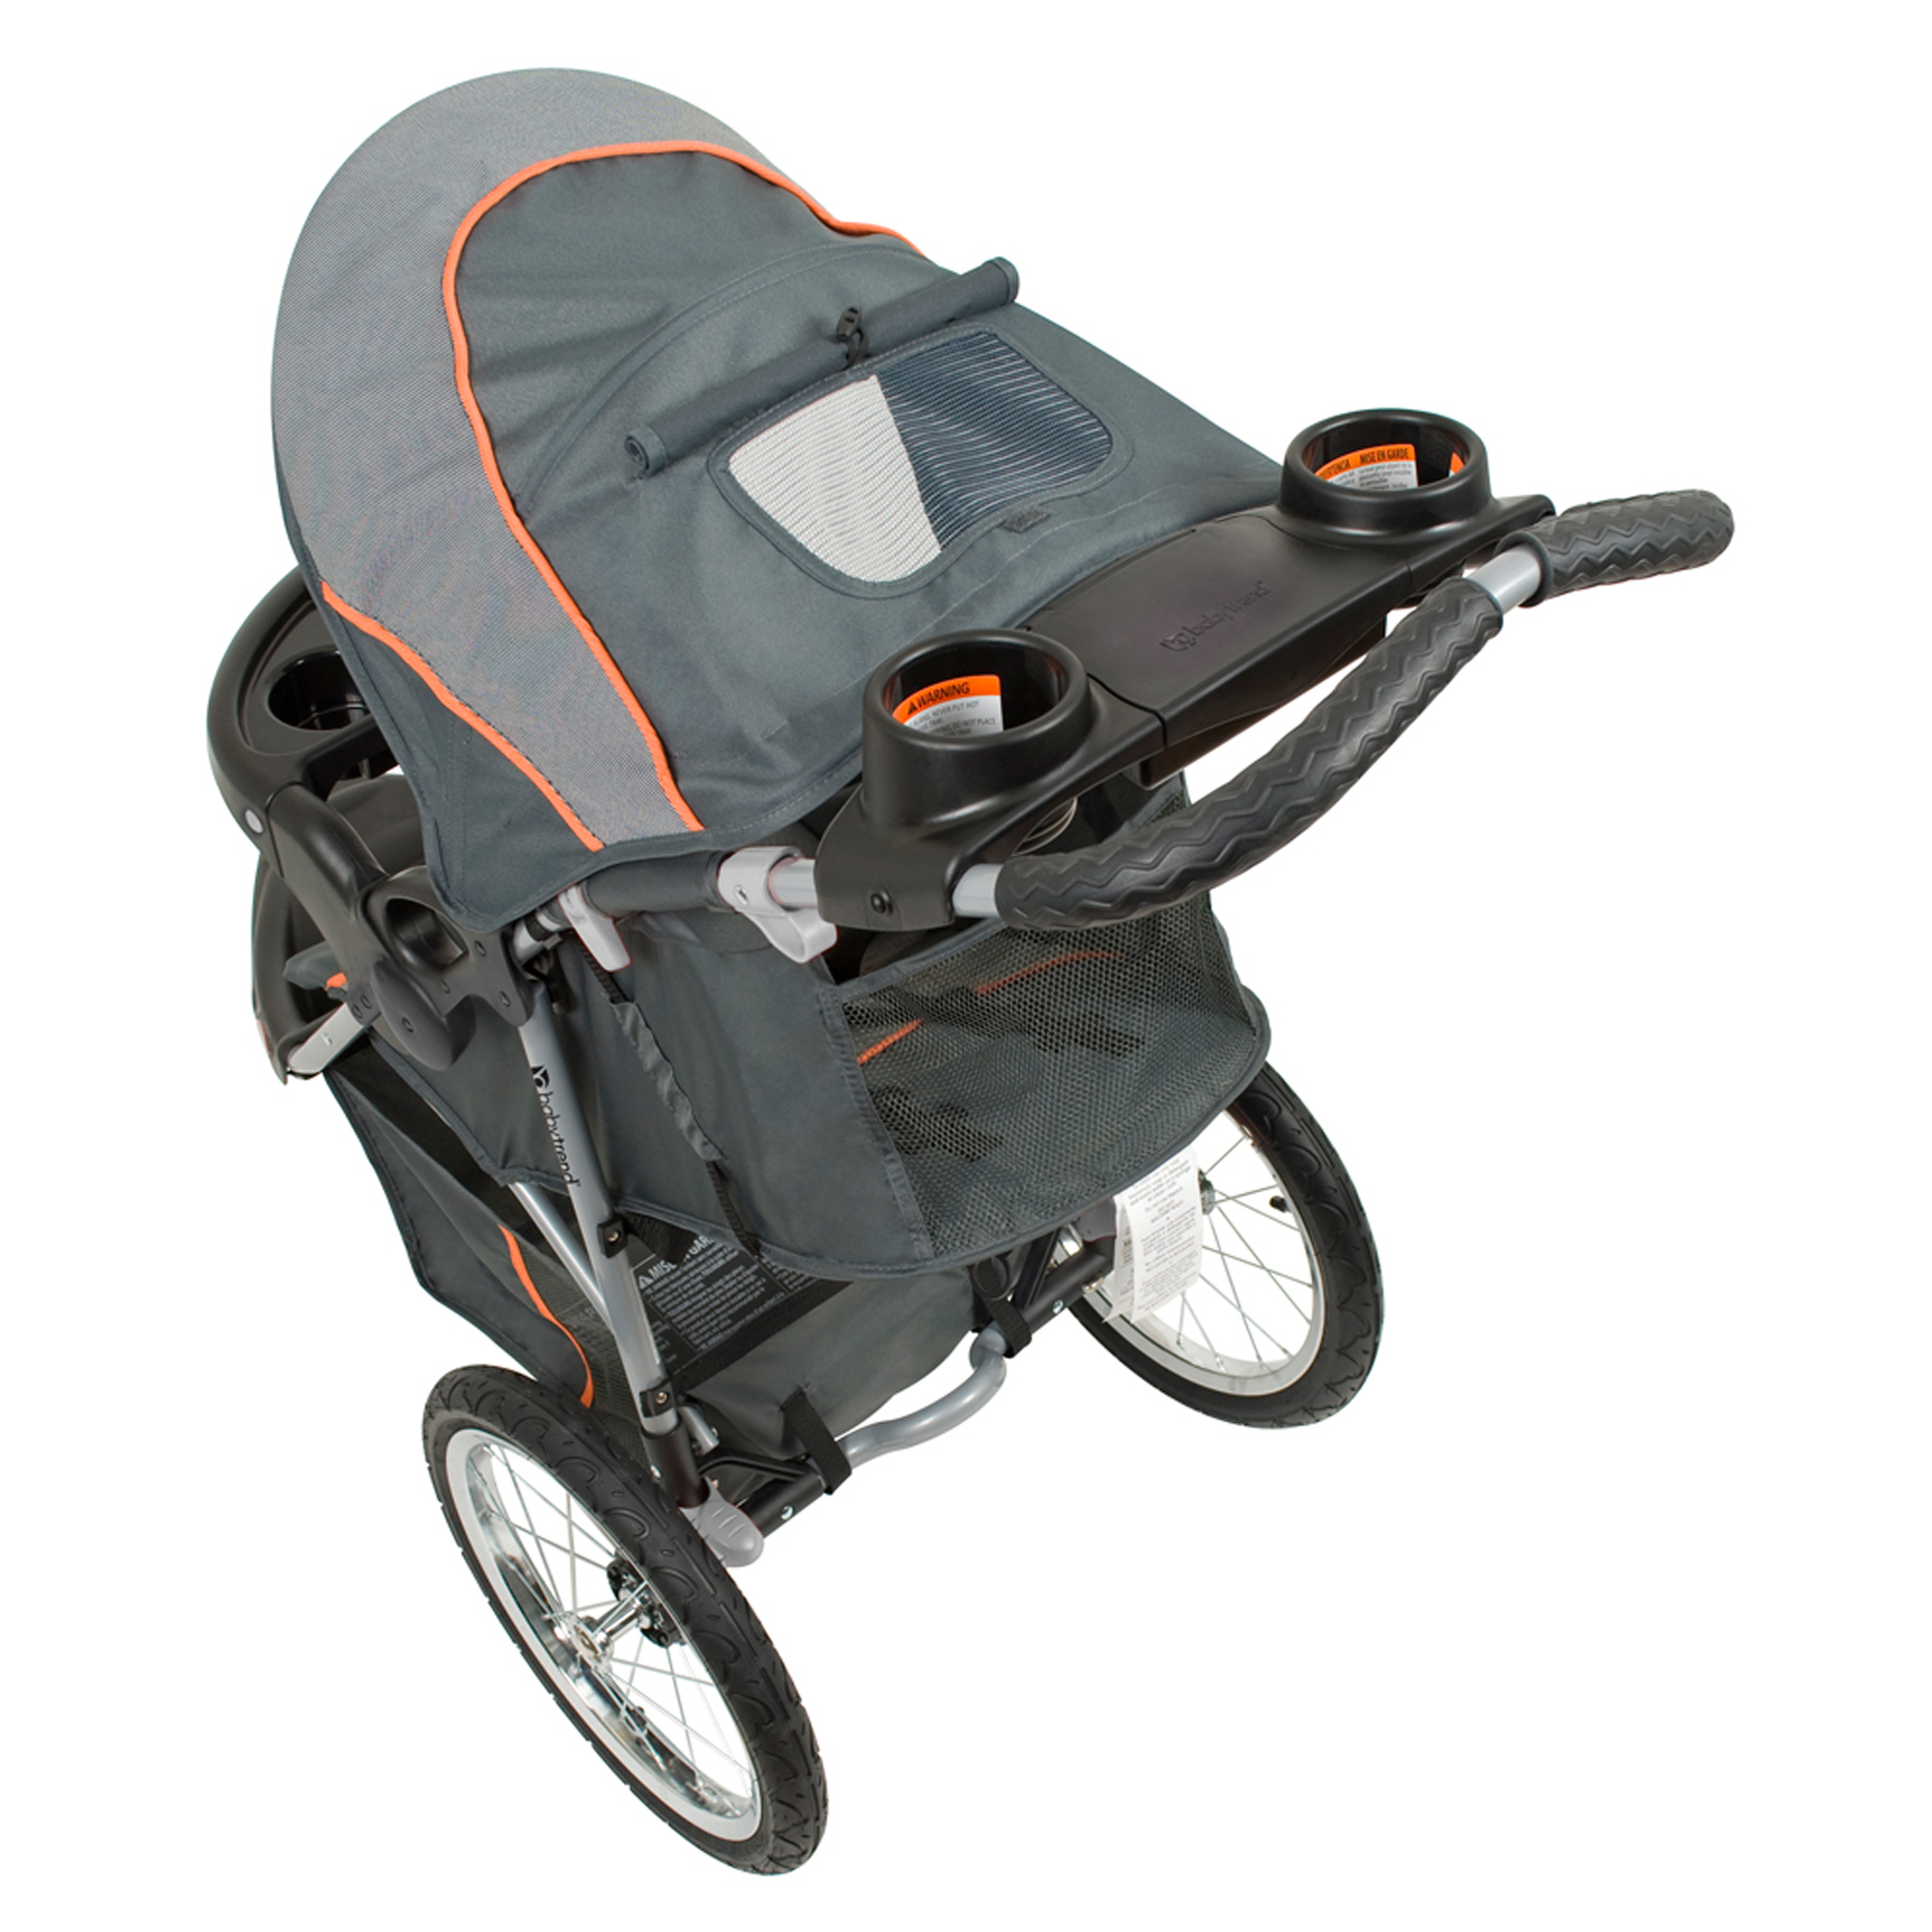 Baby Trend Expedition Jogging Stroller, Vanguard - image 3 of 6